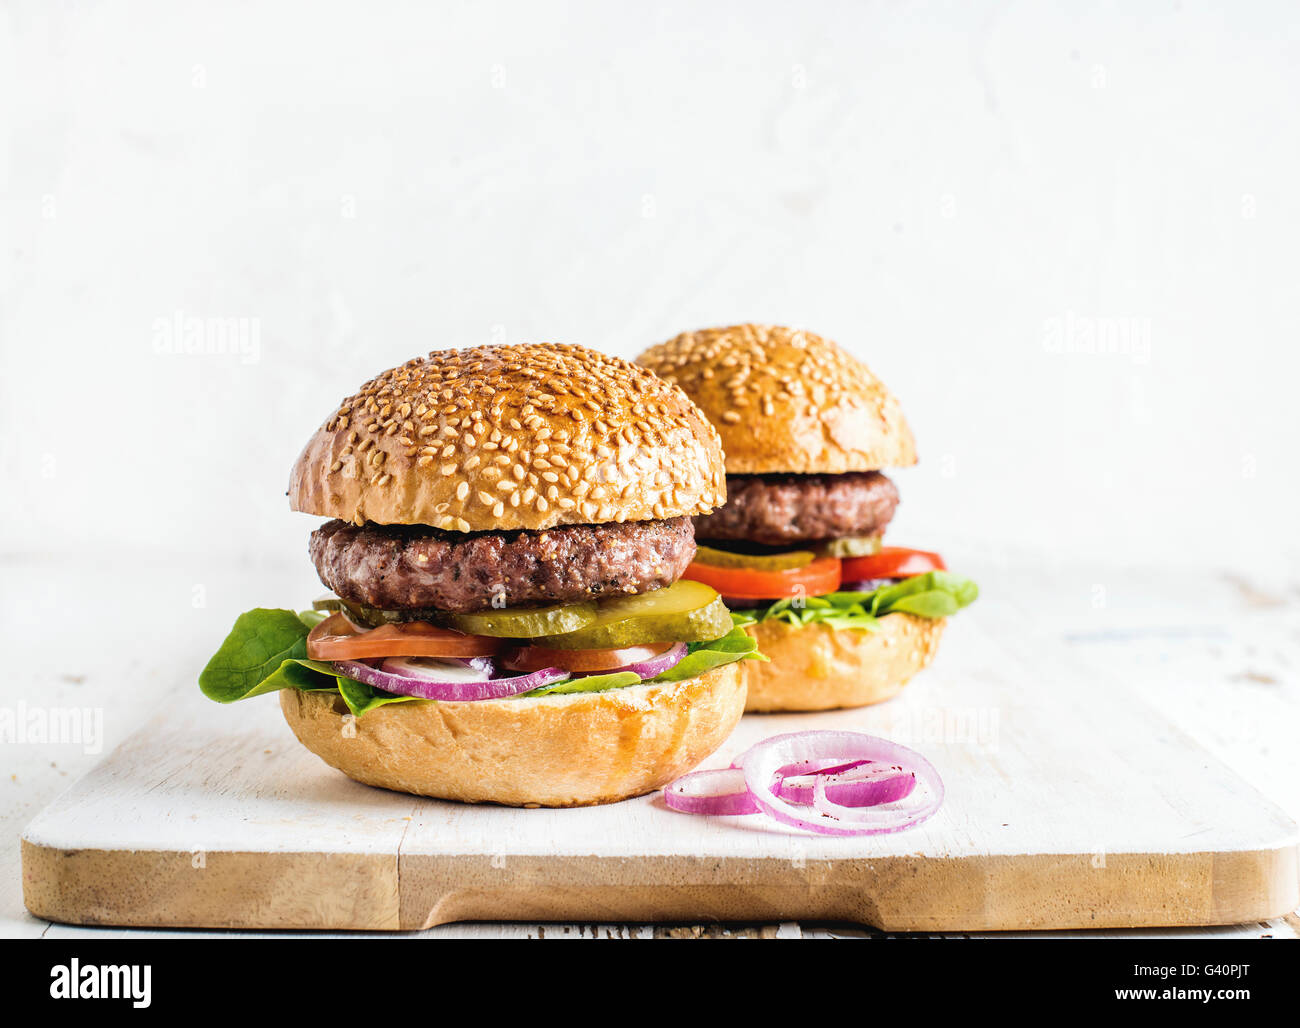 Fresh homemade burgers on wooden serving board with onion rings. White background, selective focus, copy space Stock Photo